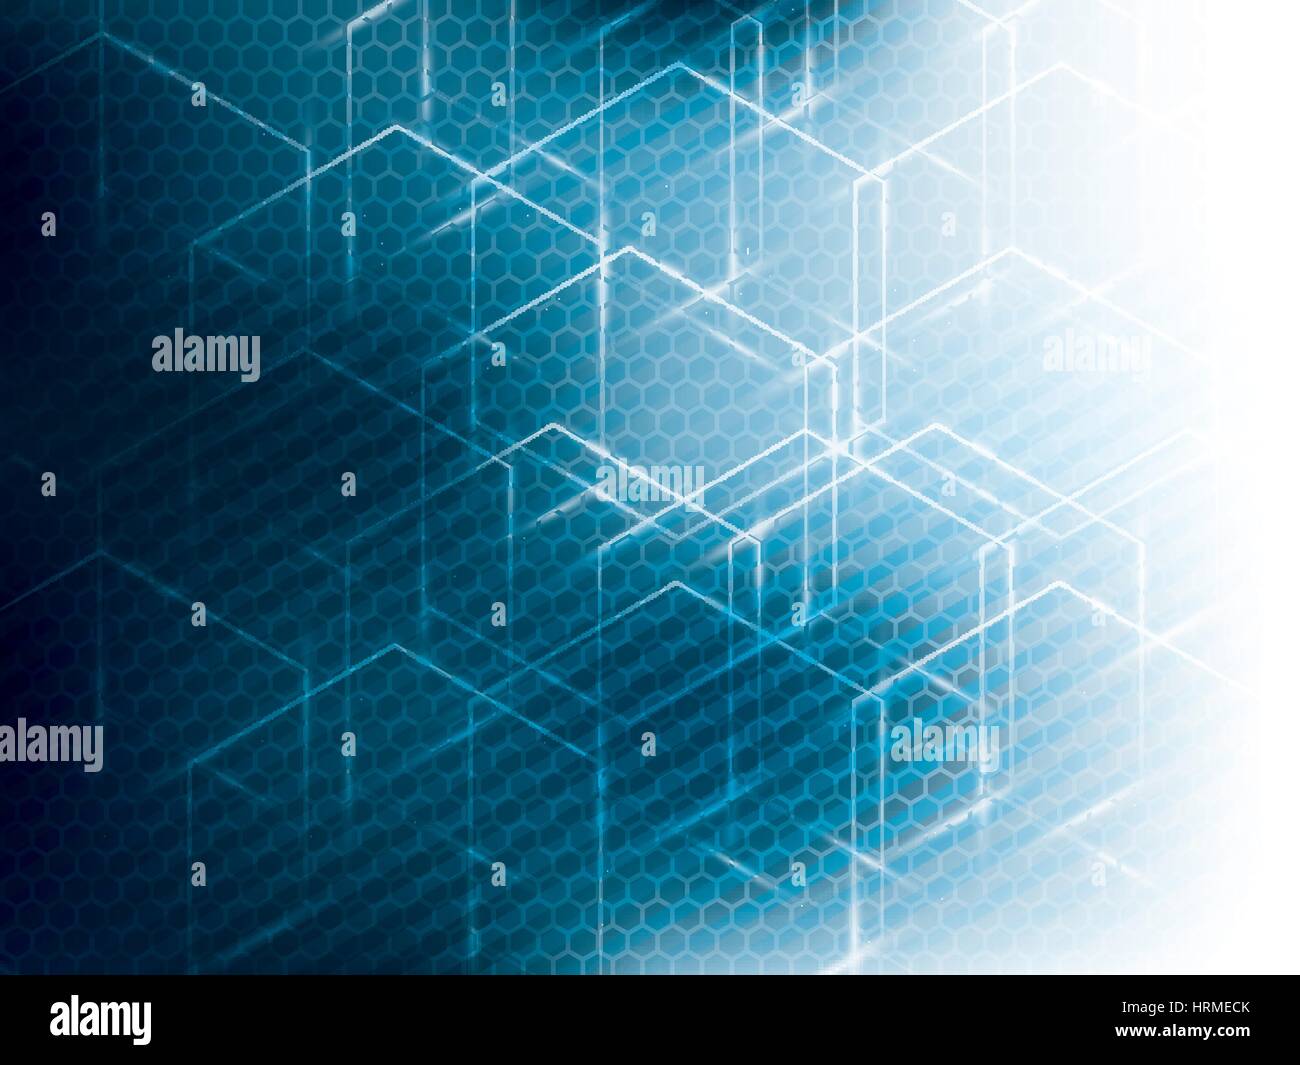 Vector abstract science technology blue background. Hexagon geometric design. Stock Vector